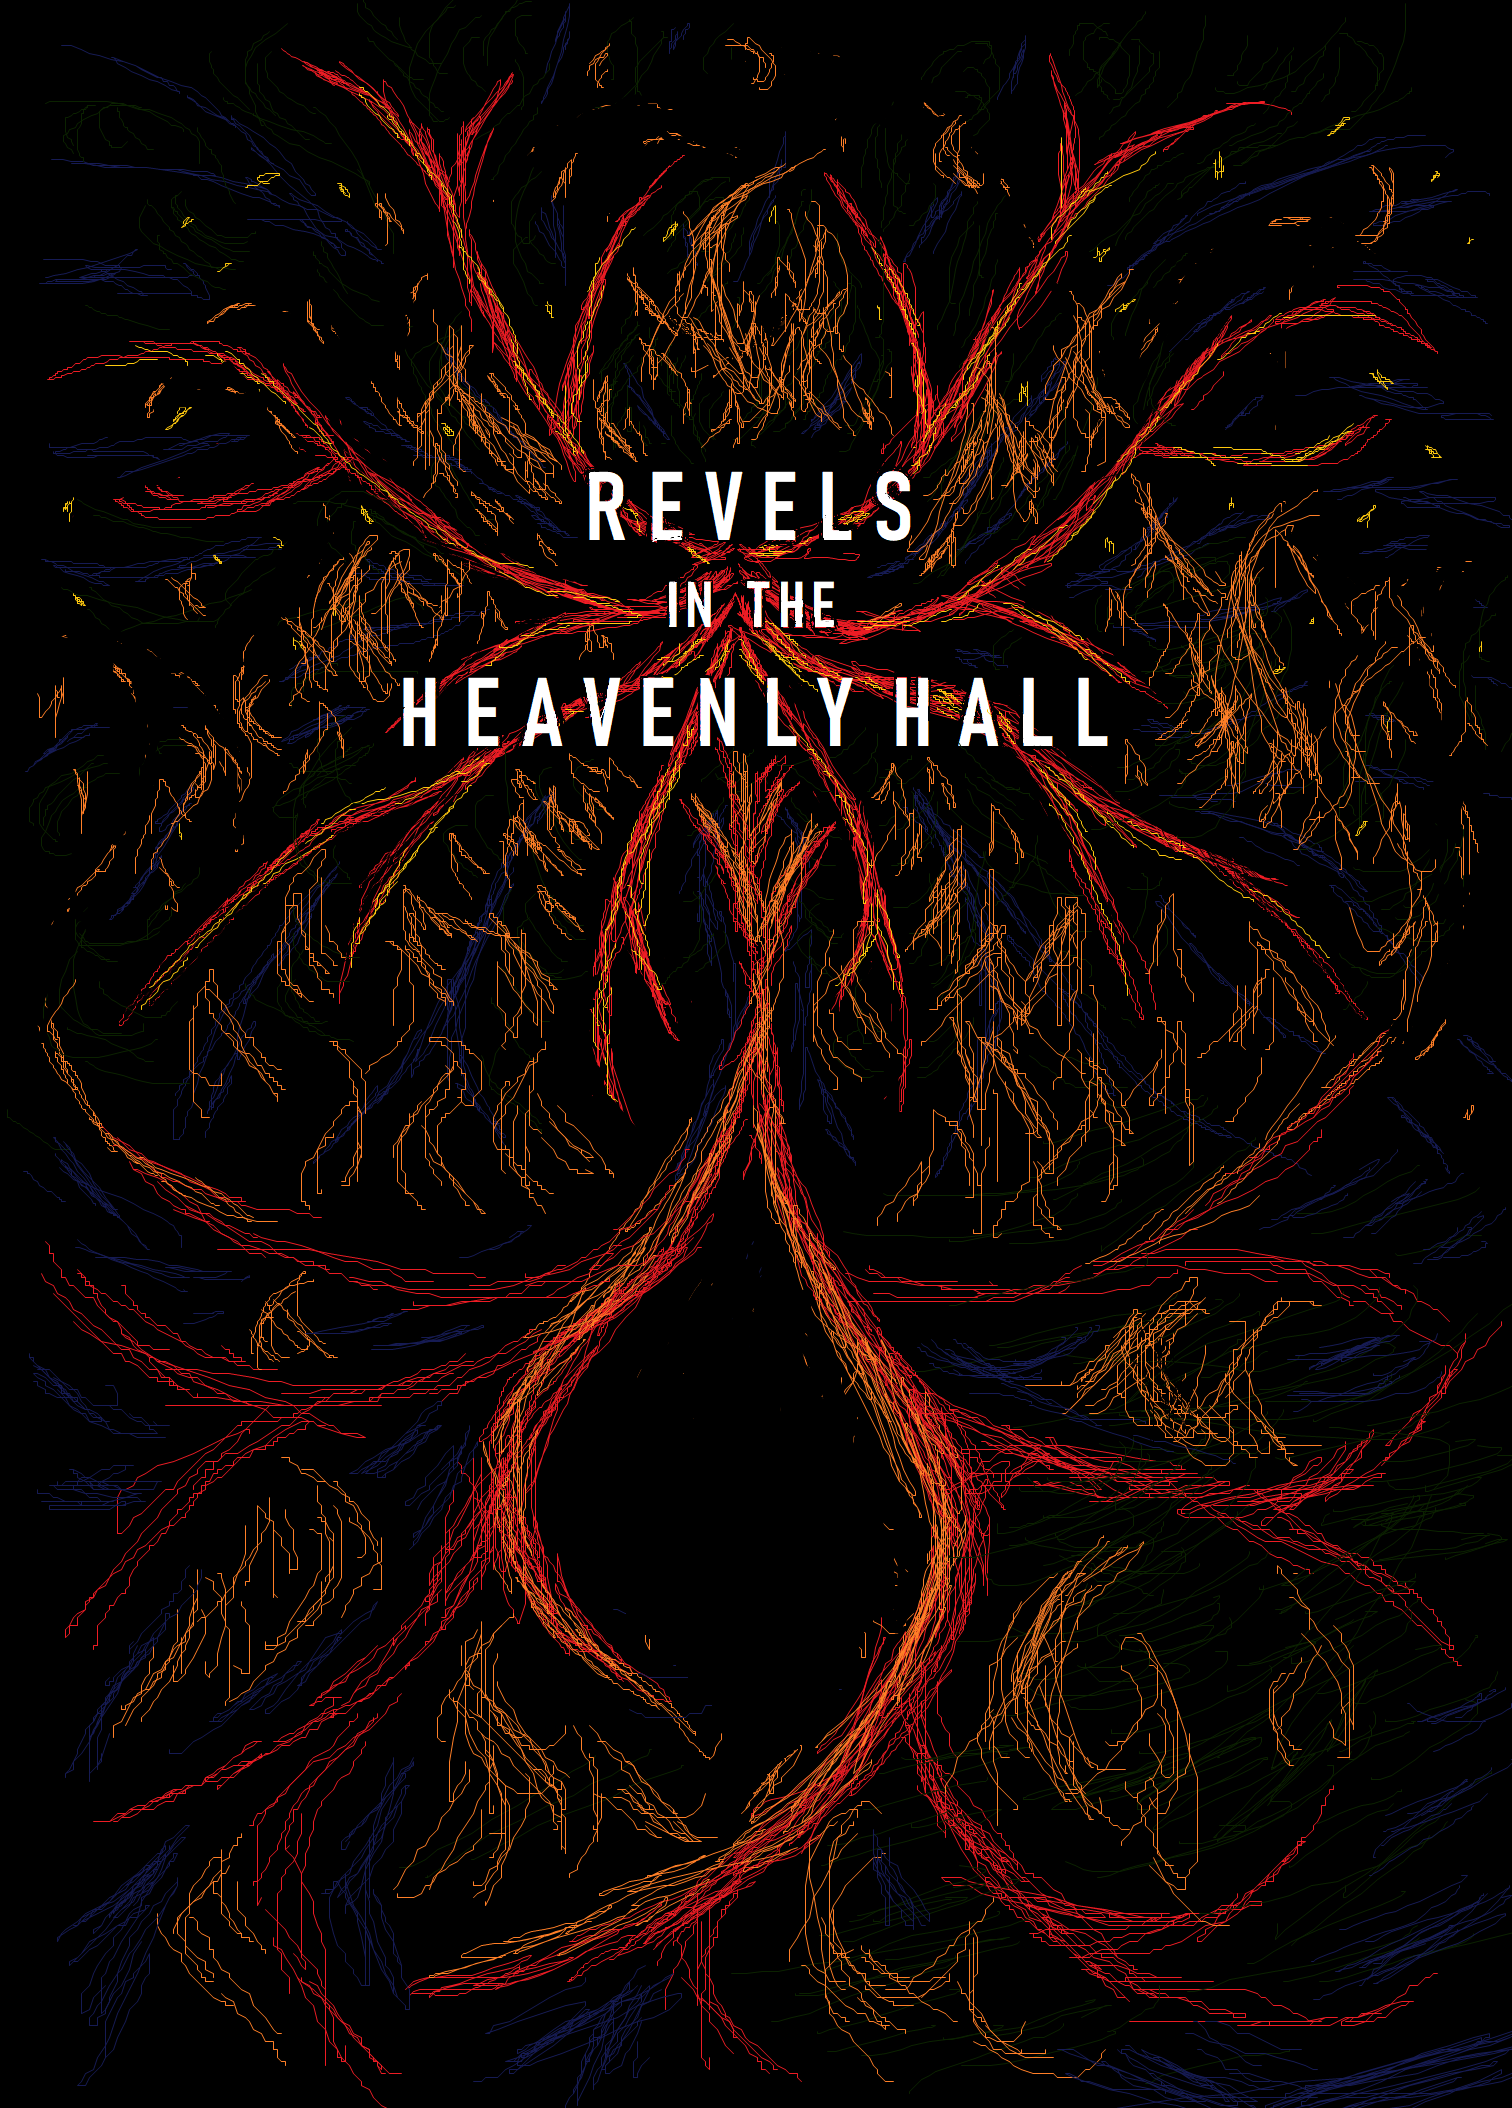 Revels in the Heavenly Hall